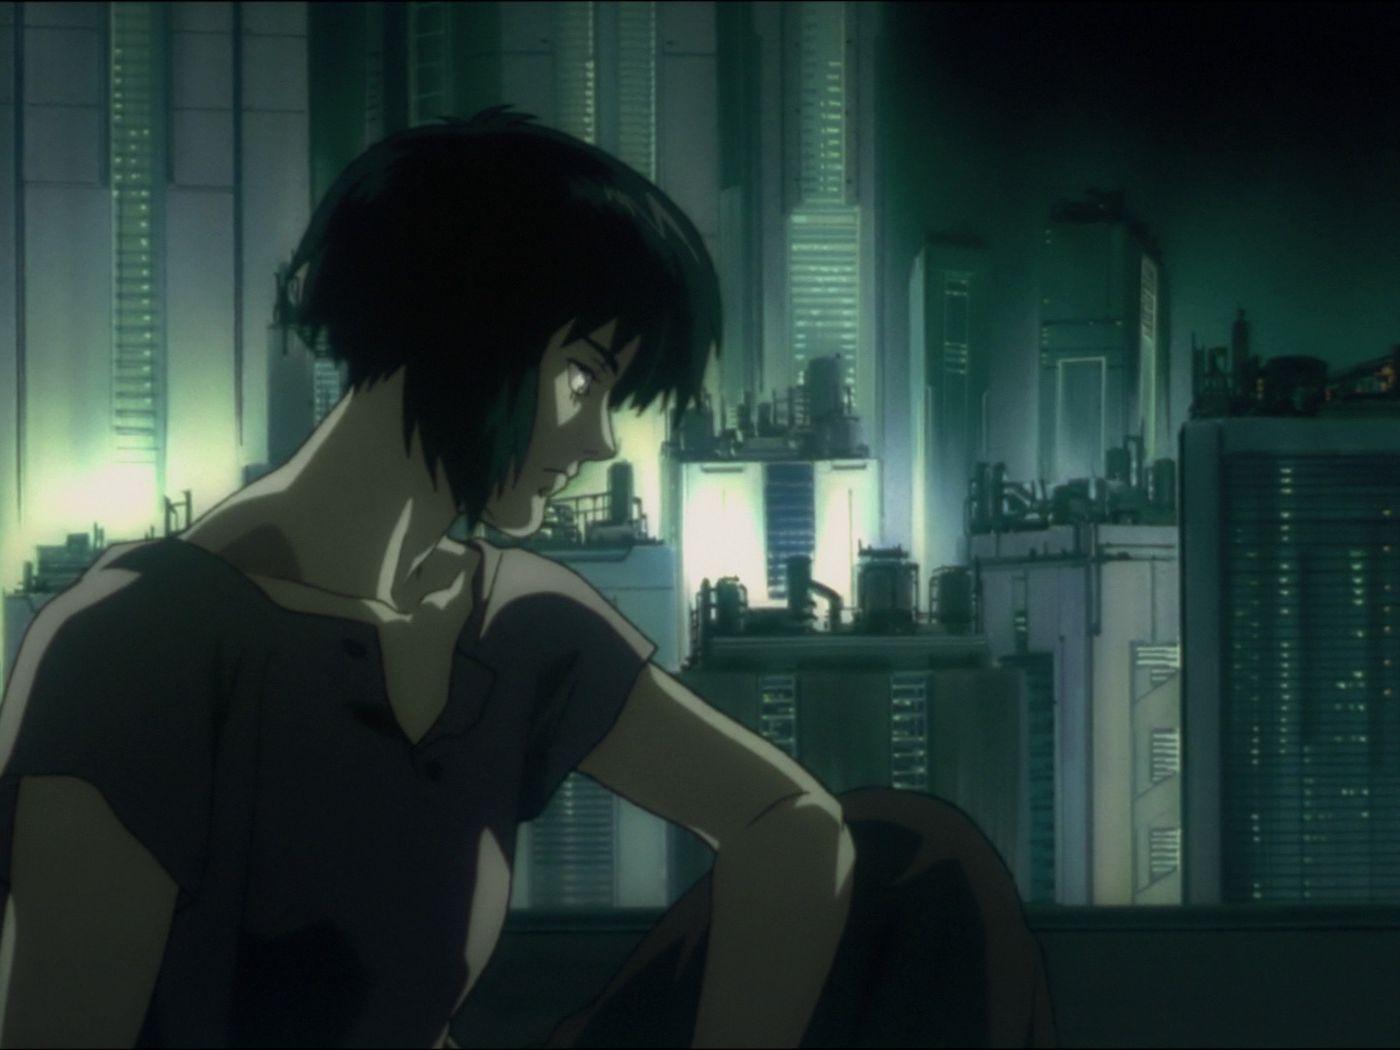 The original Ghost in the Shell is iconic anime, and a rich